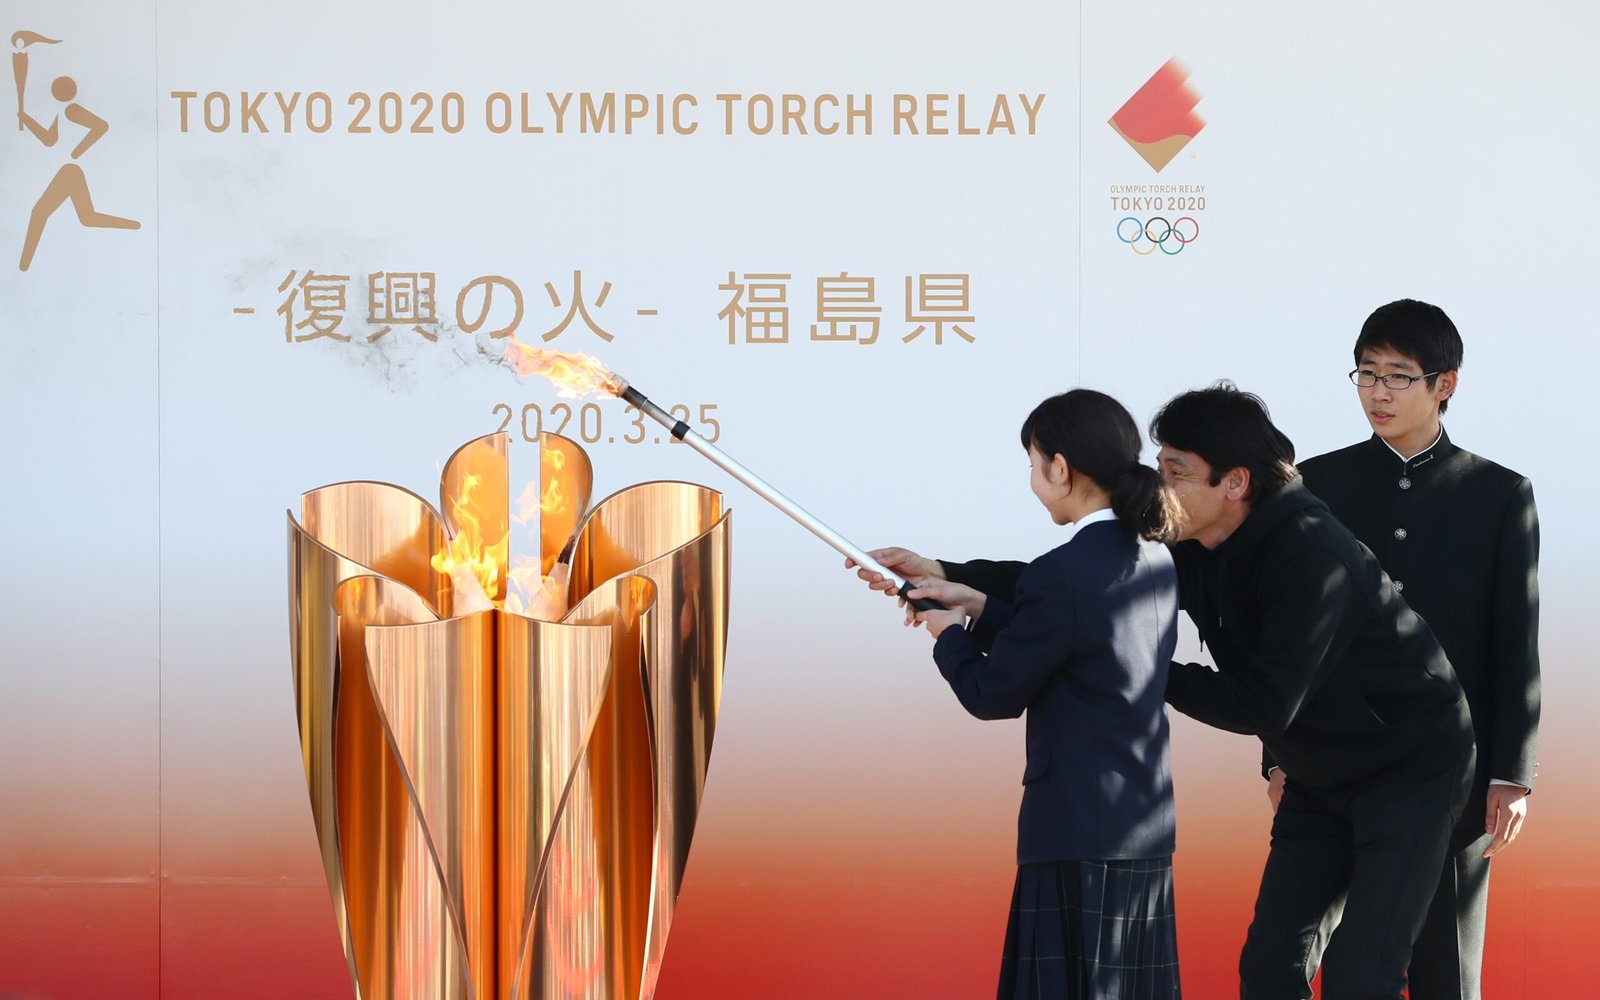 The Olympic flame 